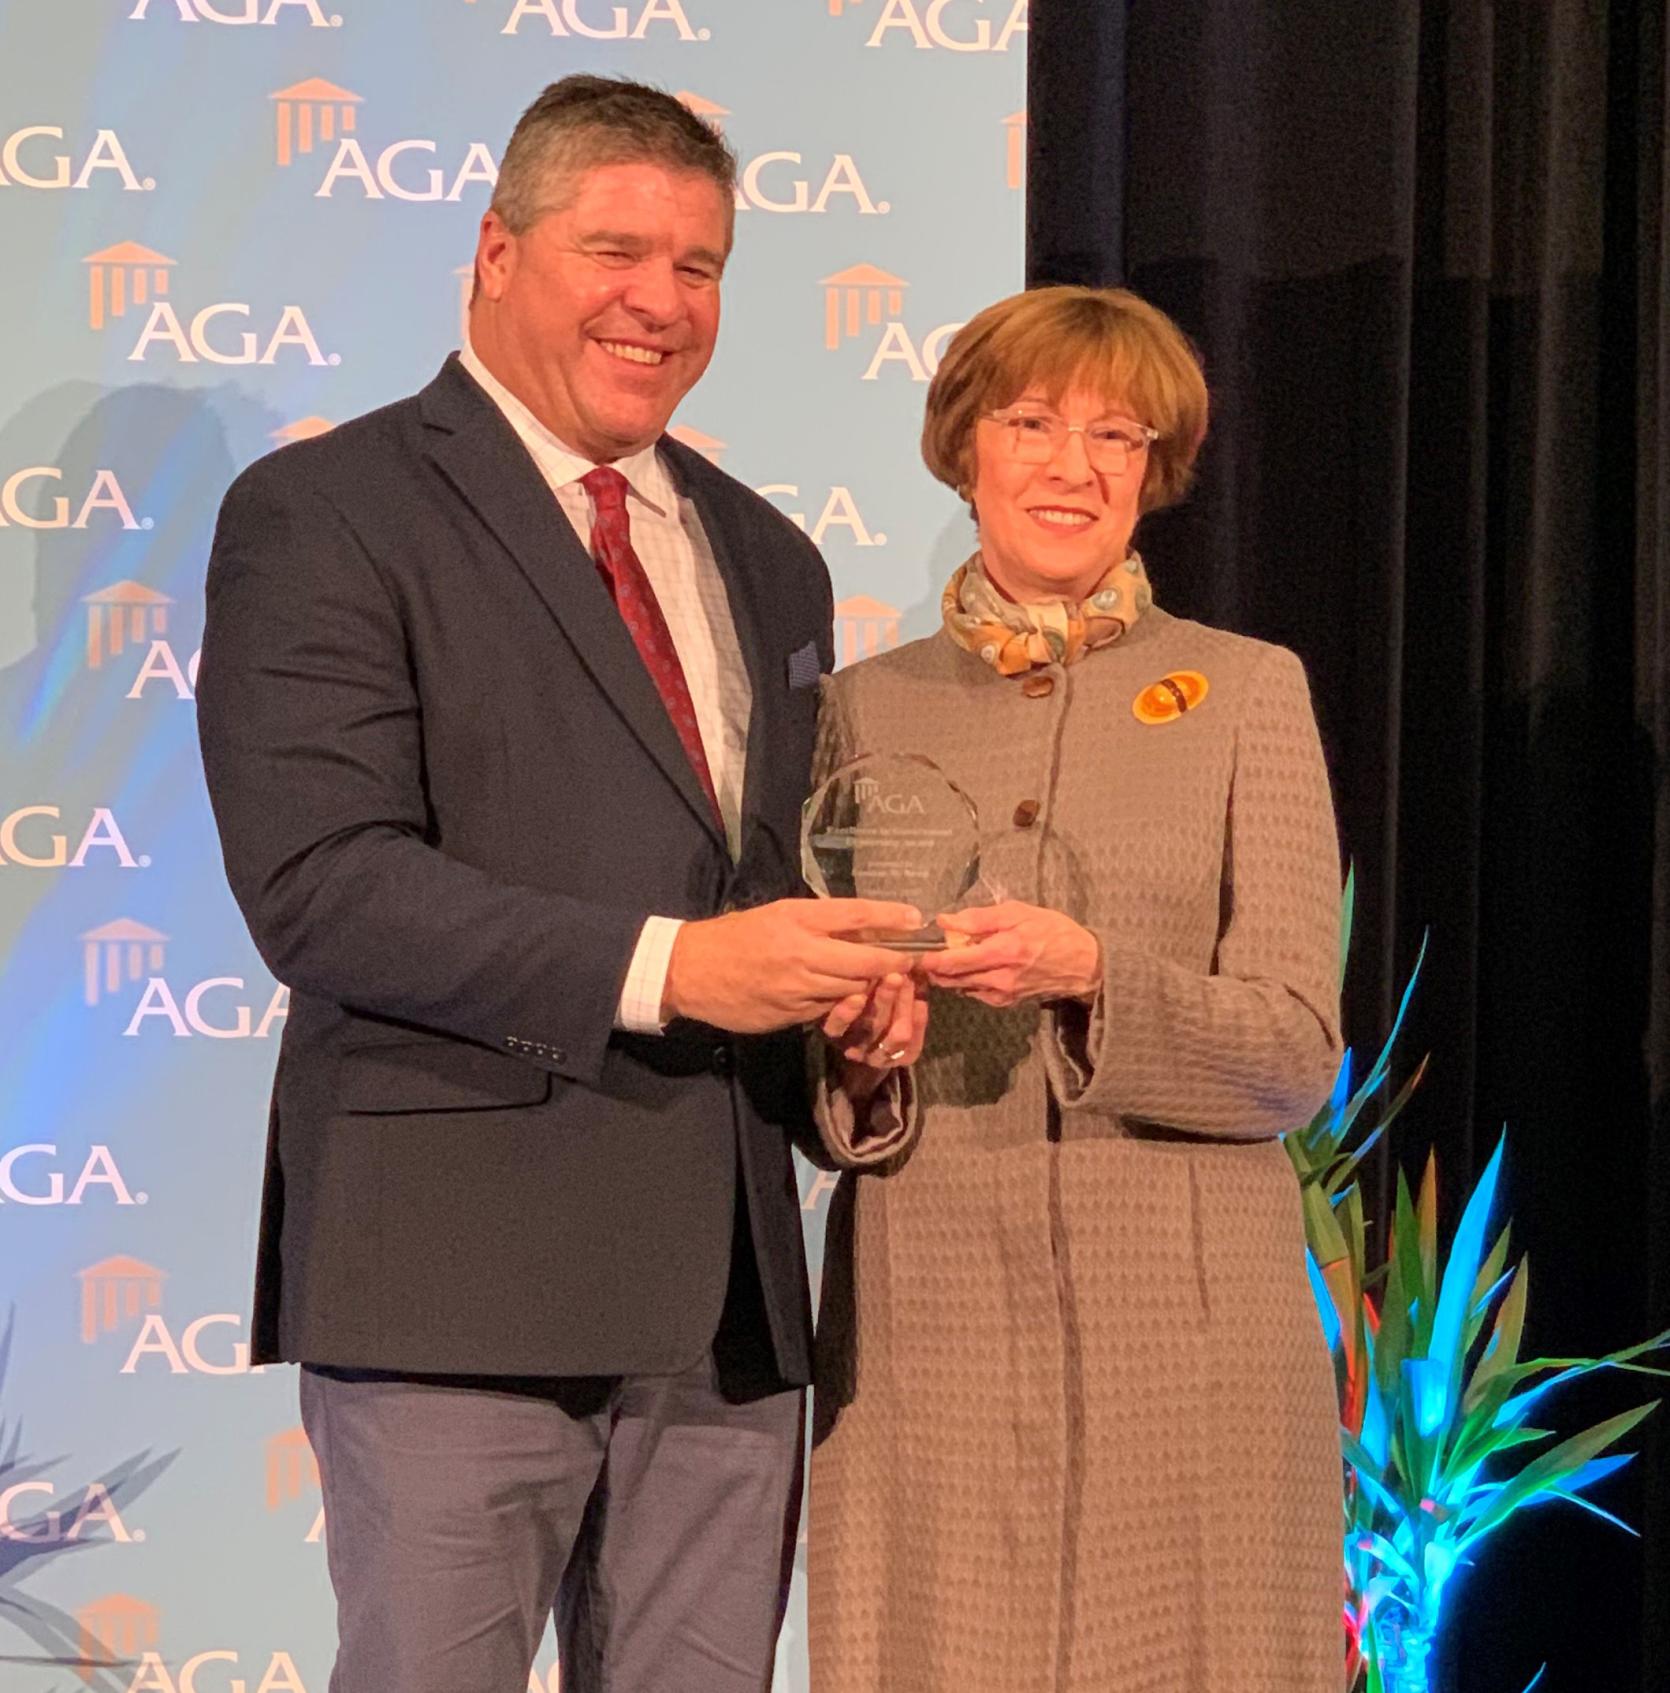 Auditor Bump receives the 2020 Excellence in Government Leadership Award from AGA President Ernie Almonte.